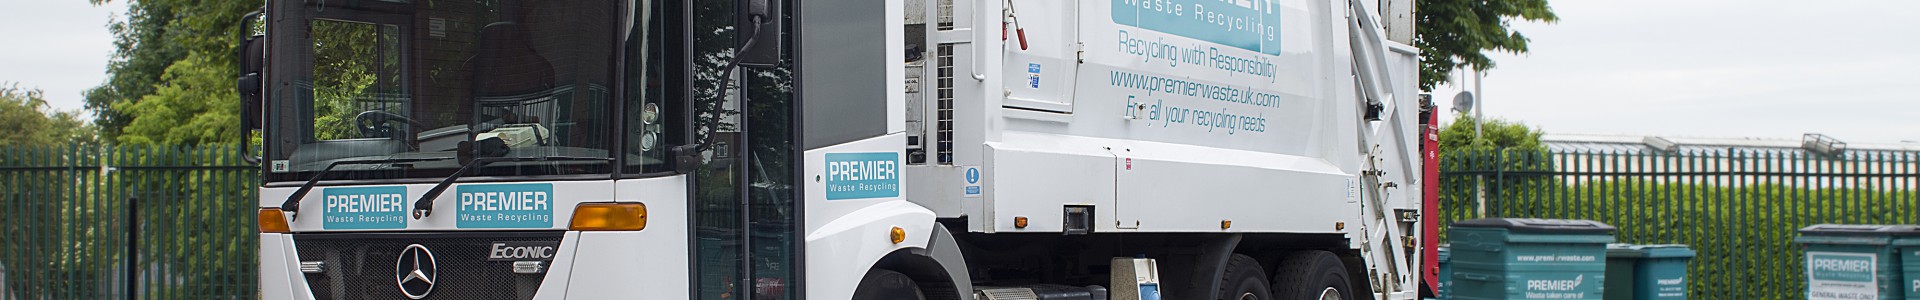 Premier Waste Recycling products and services.